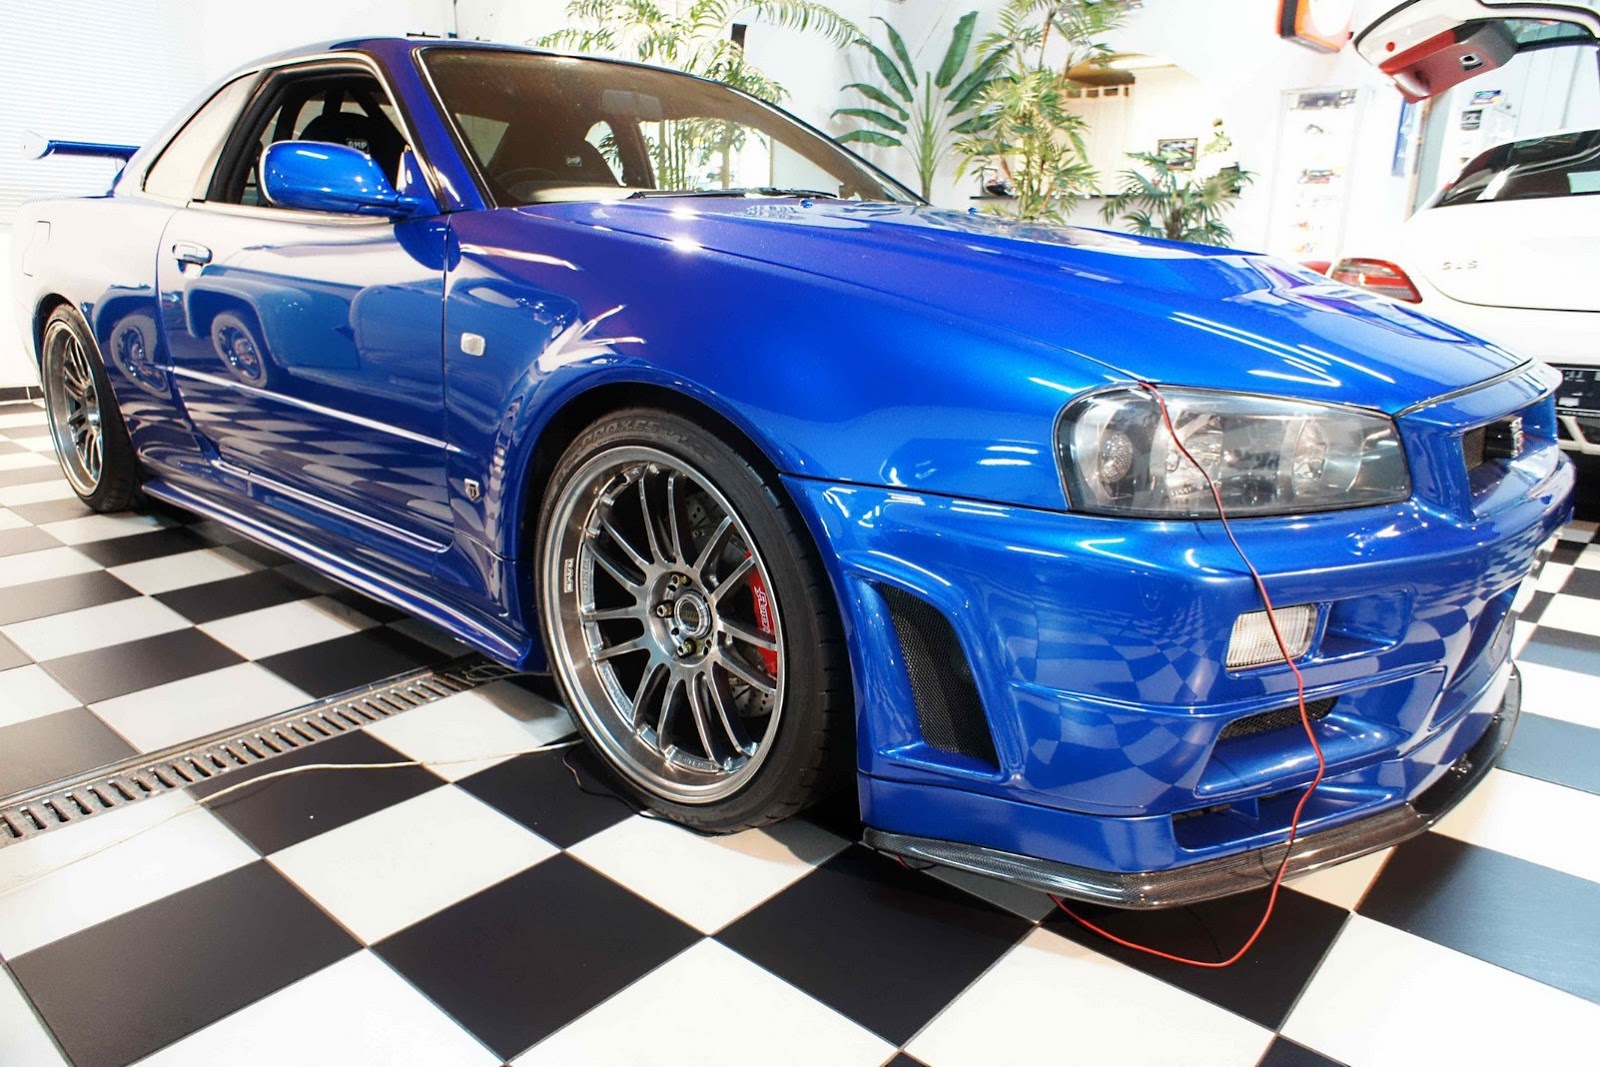 paul walker r34 fast and furious 2